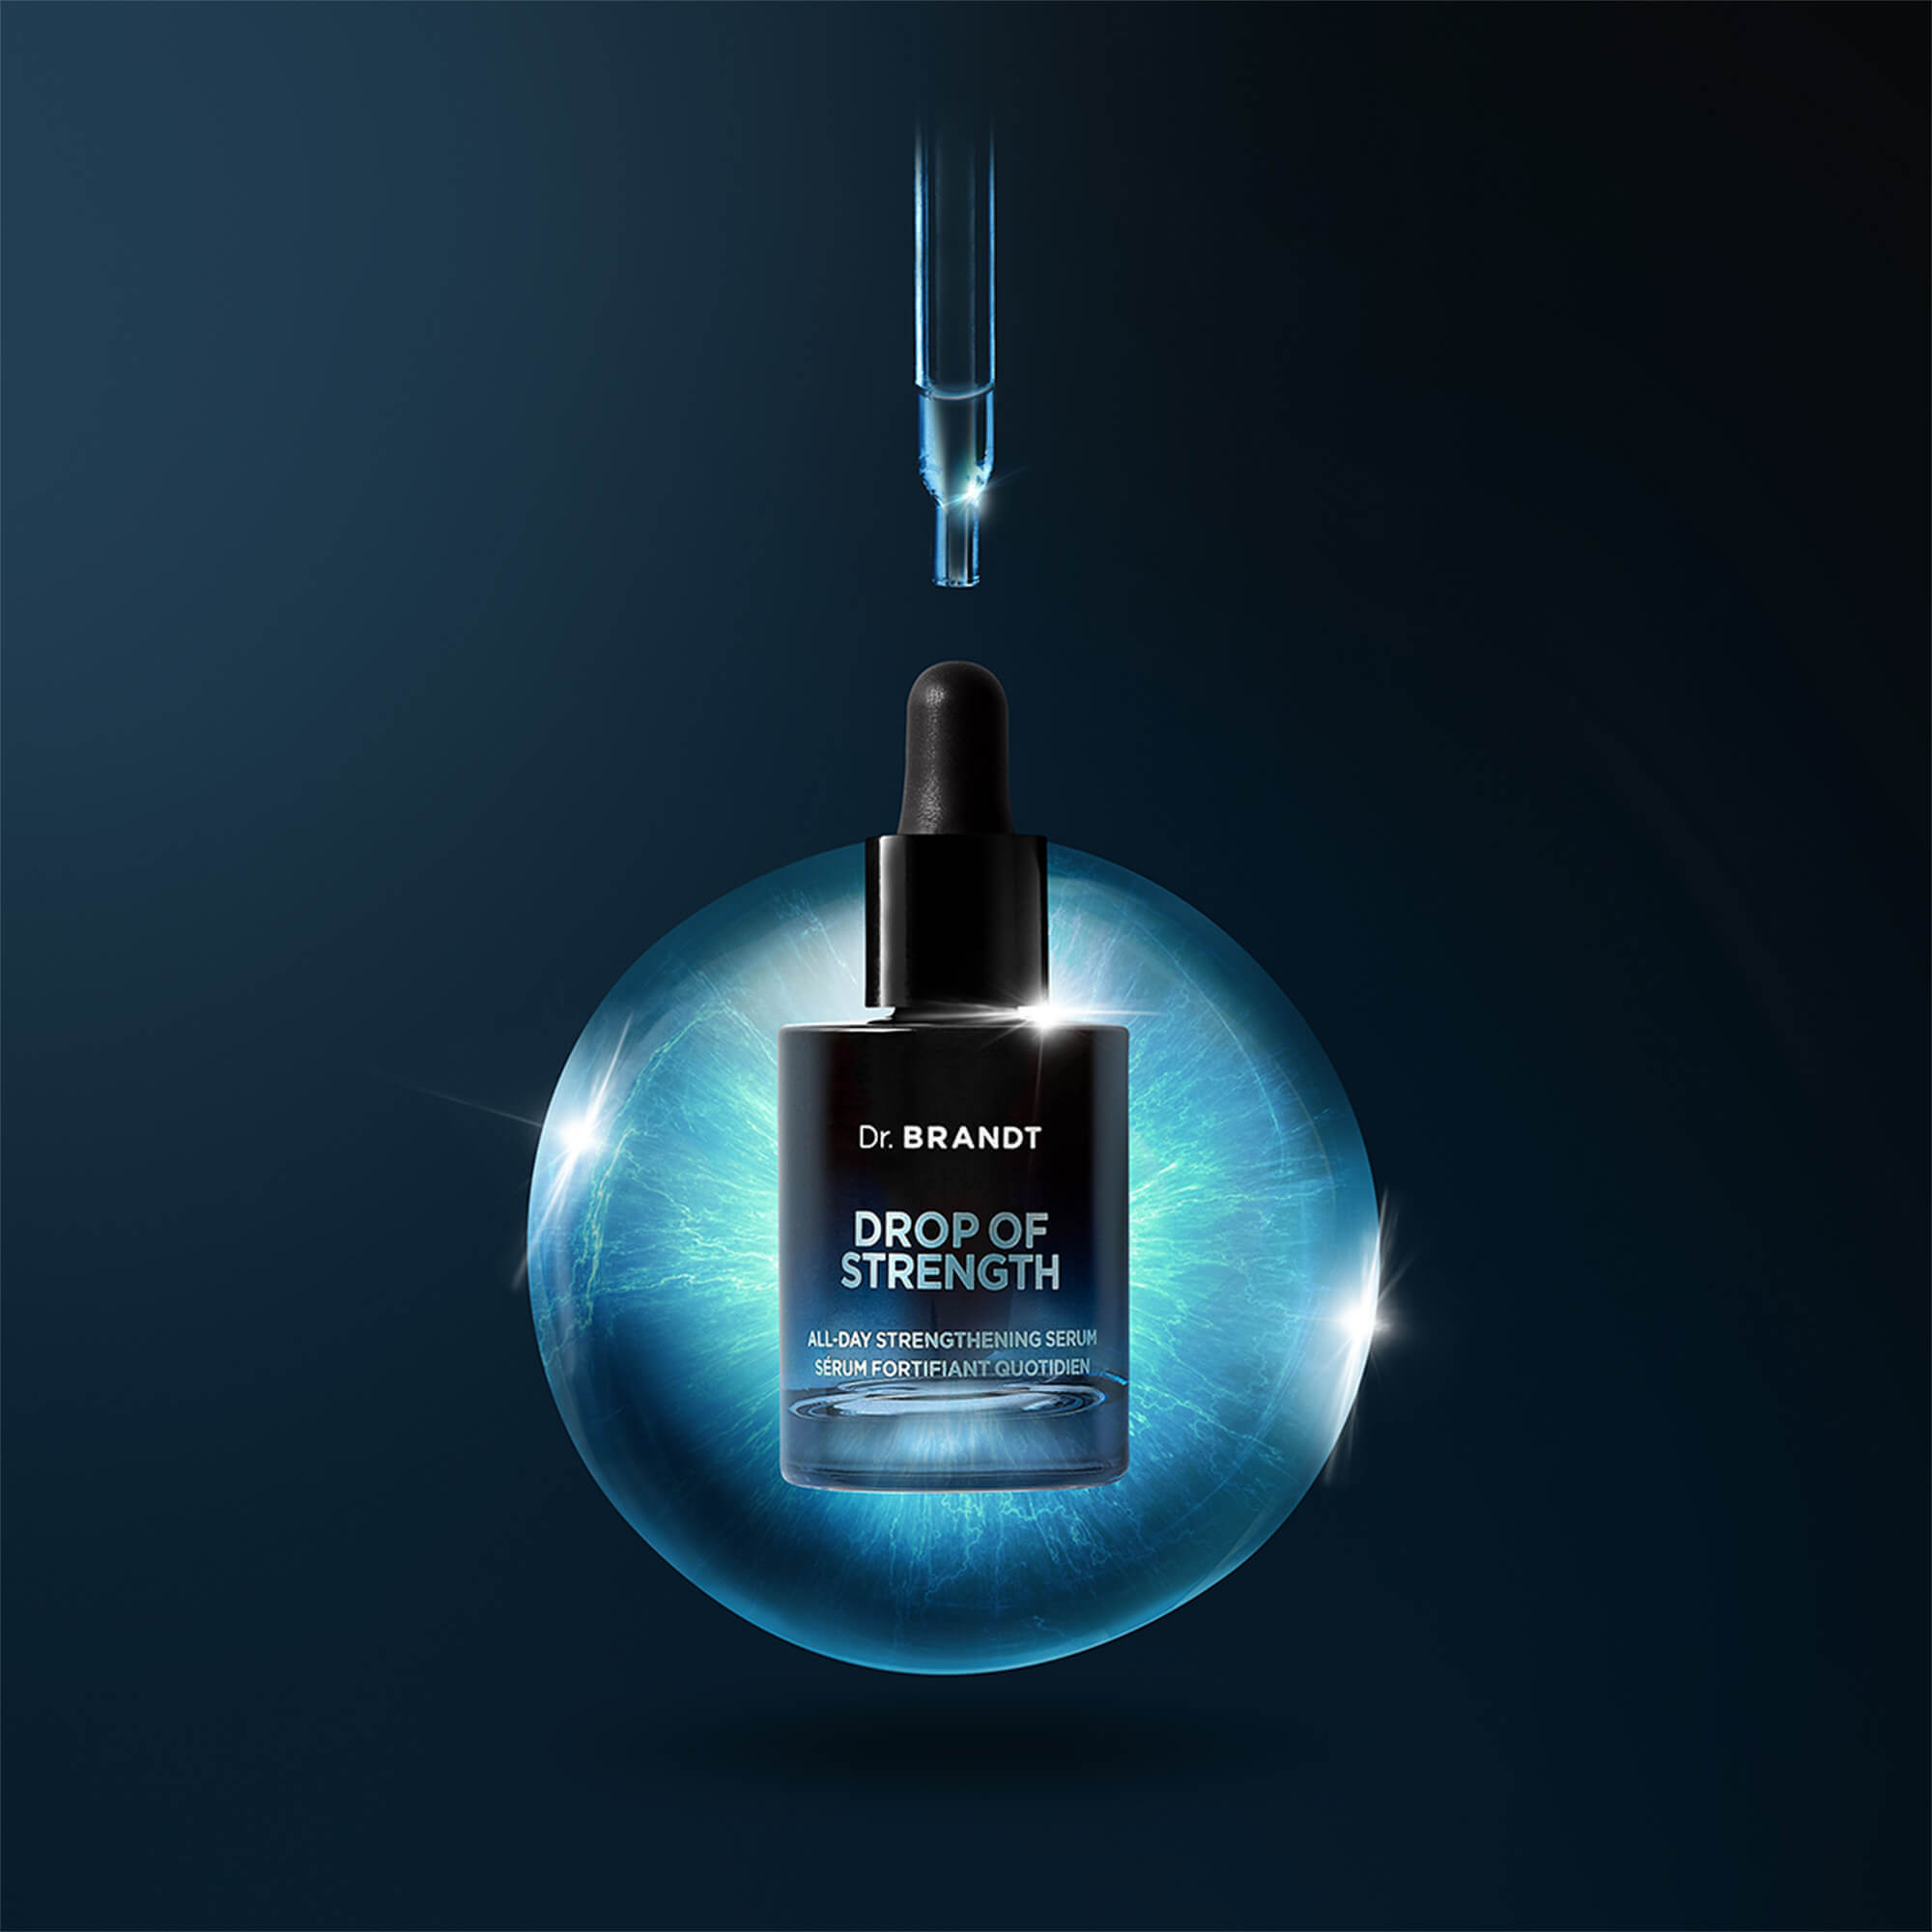 Drop Of Strength product collection. A fortifying serum inspired by Nobel Prize winning research on autophagy, helps to defend your skin from oxidative stressors and decrease premature aging. shop now.